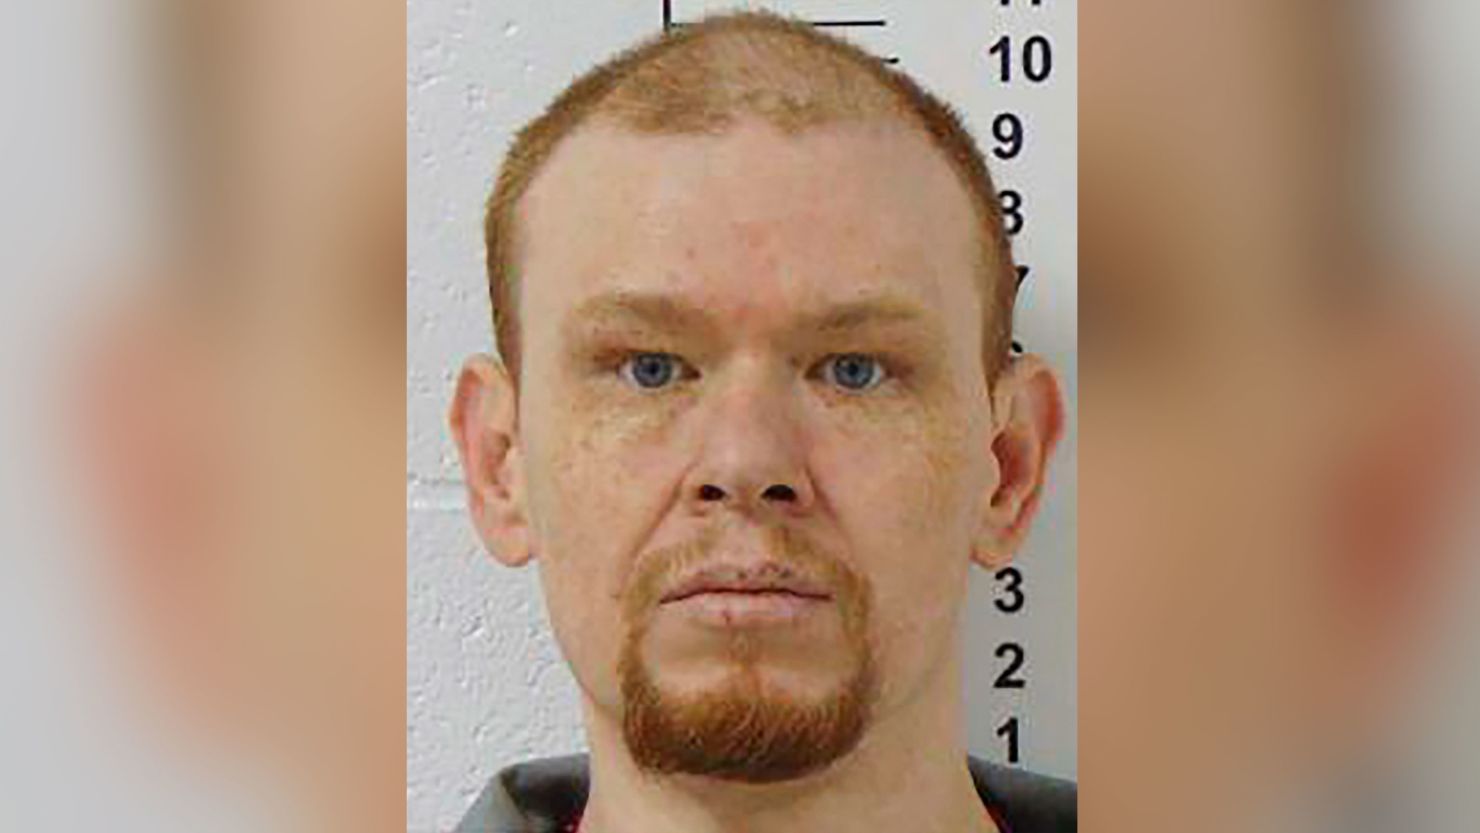 Johnny Johnson, who was executed Tuesday for the 2002 murder of a 6-year-old girl, is seen in this undated photo from Missouri Department of Corrections.